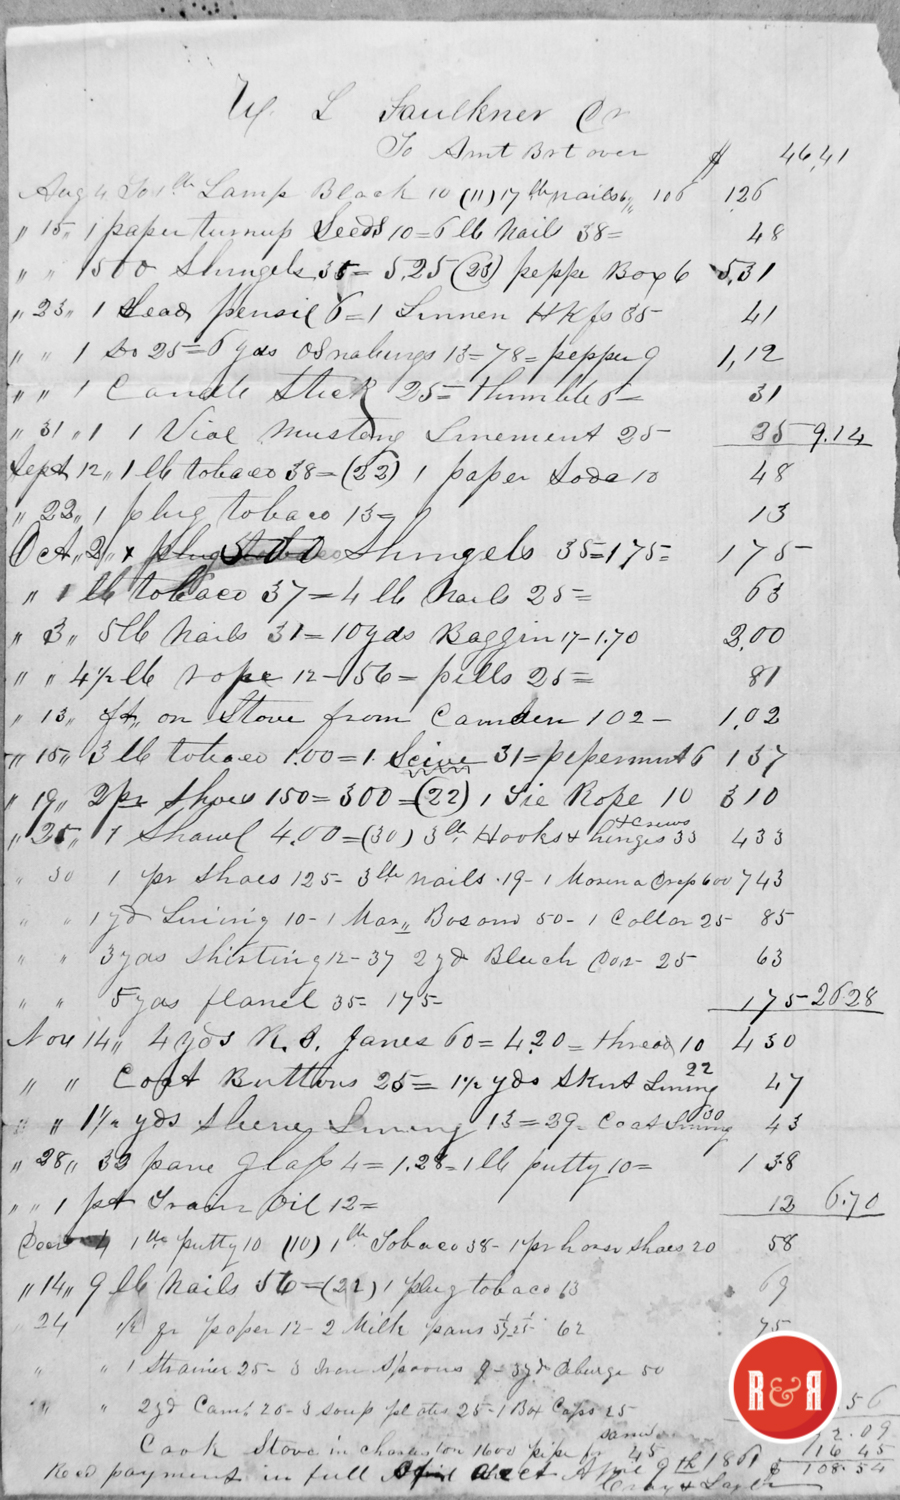 LEDGER FROM CRAIG AND TAYLOR - 1860, p. 2